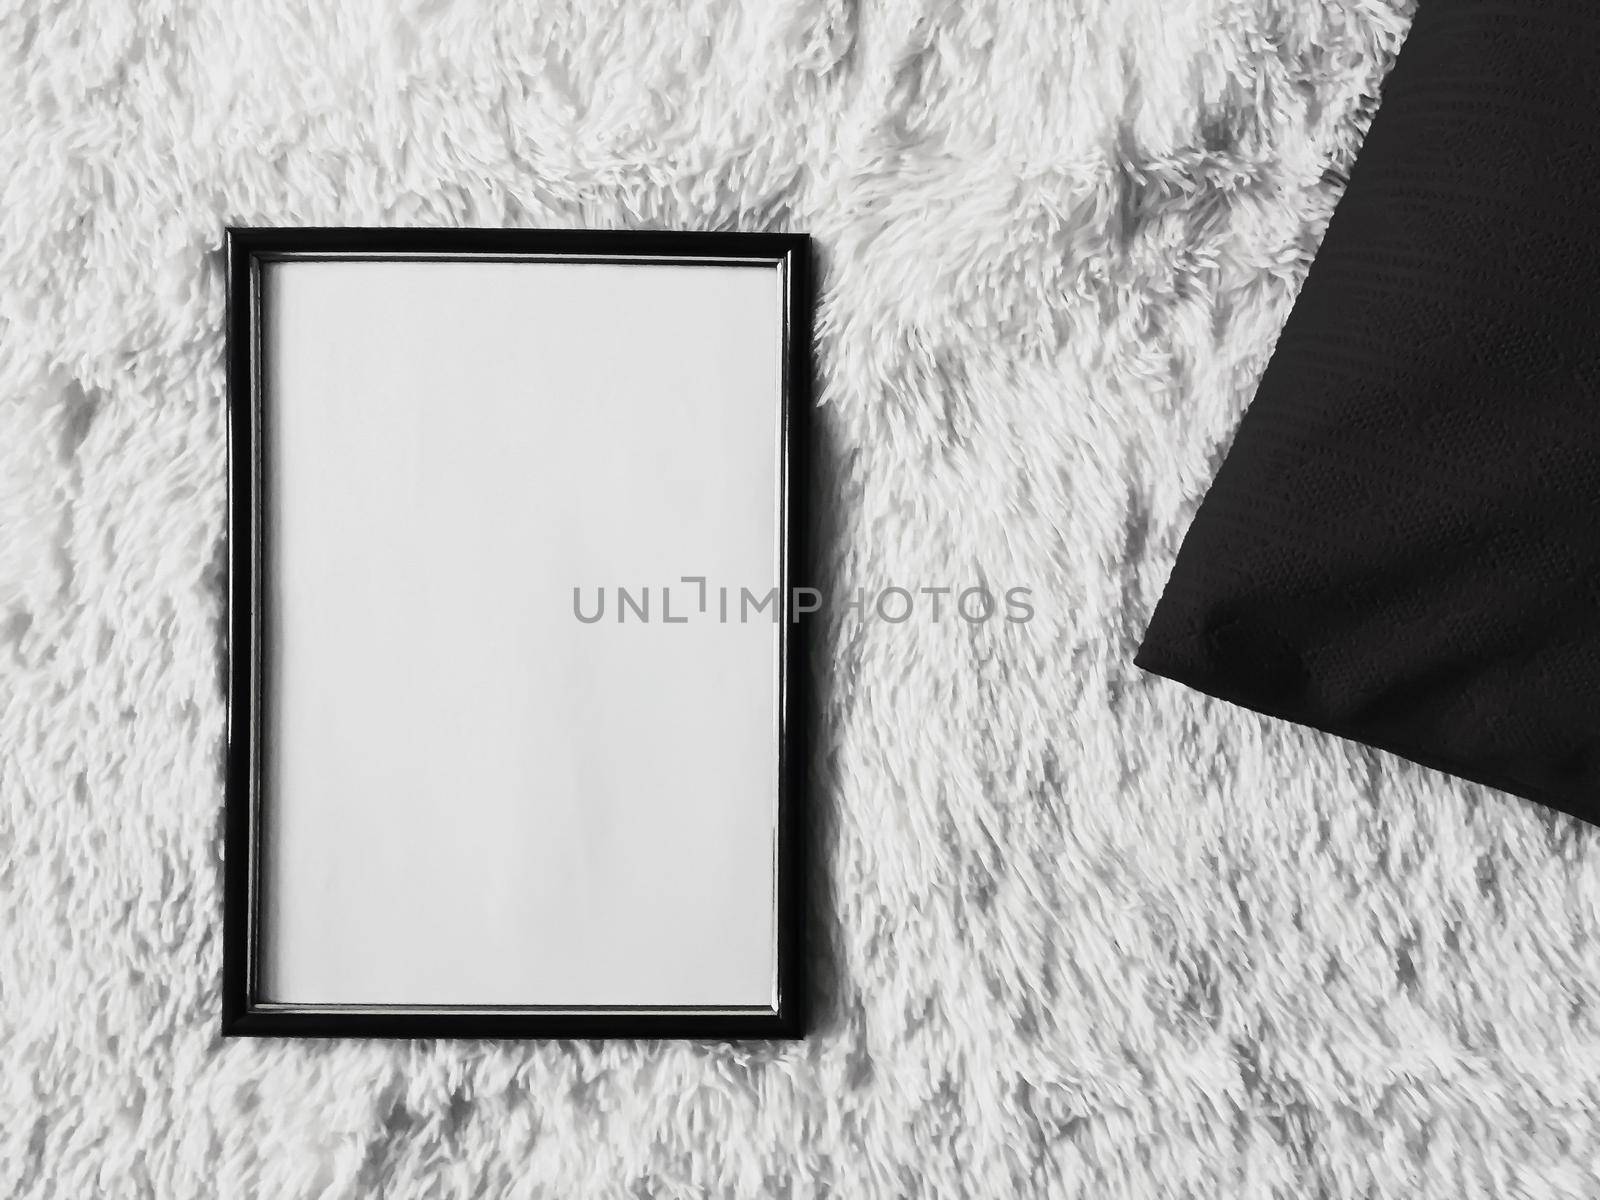 Thin wooden frame with blank copyspace as poster photo print mockup, black cushion pillow and fluffy white blanket, flat lay background and art product, top view